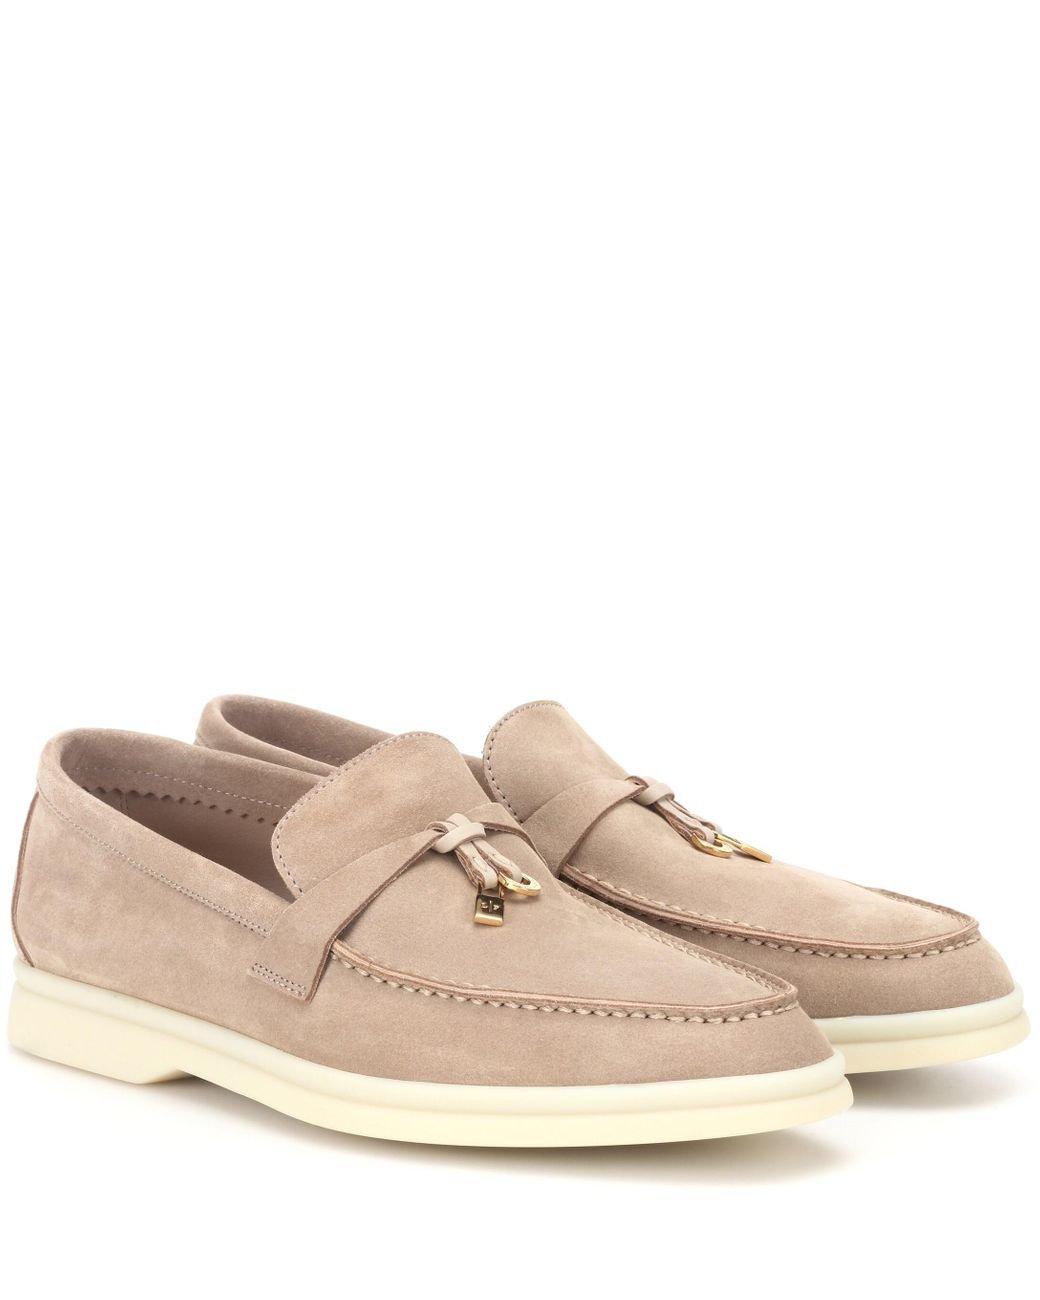 Loro Piana Summer Charms Walk Suede Loafers in Natural | Lyst Canada